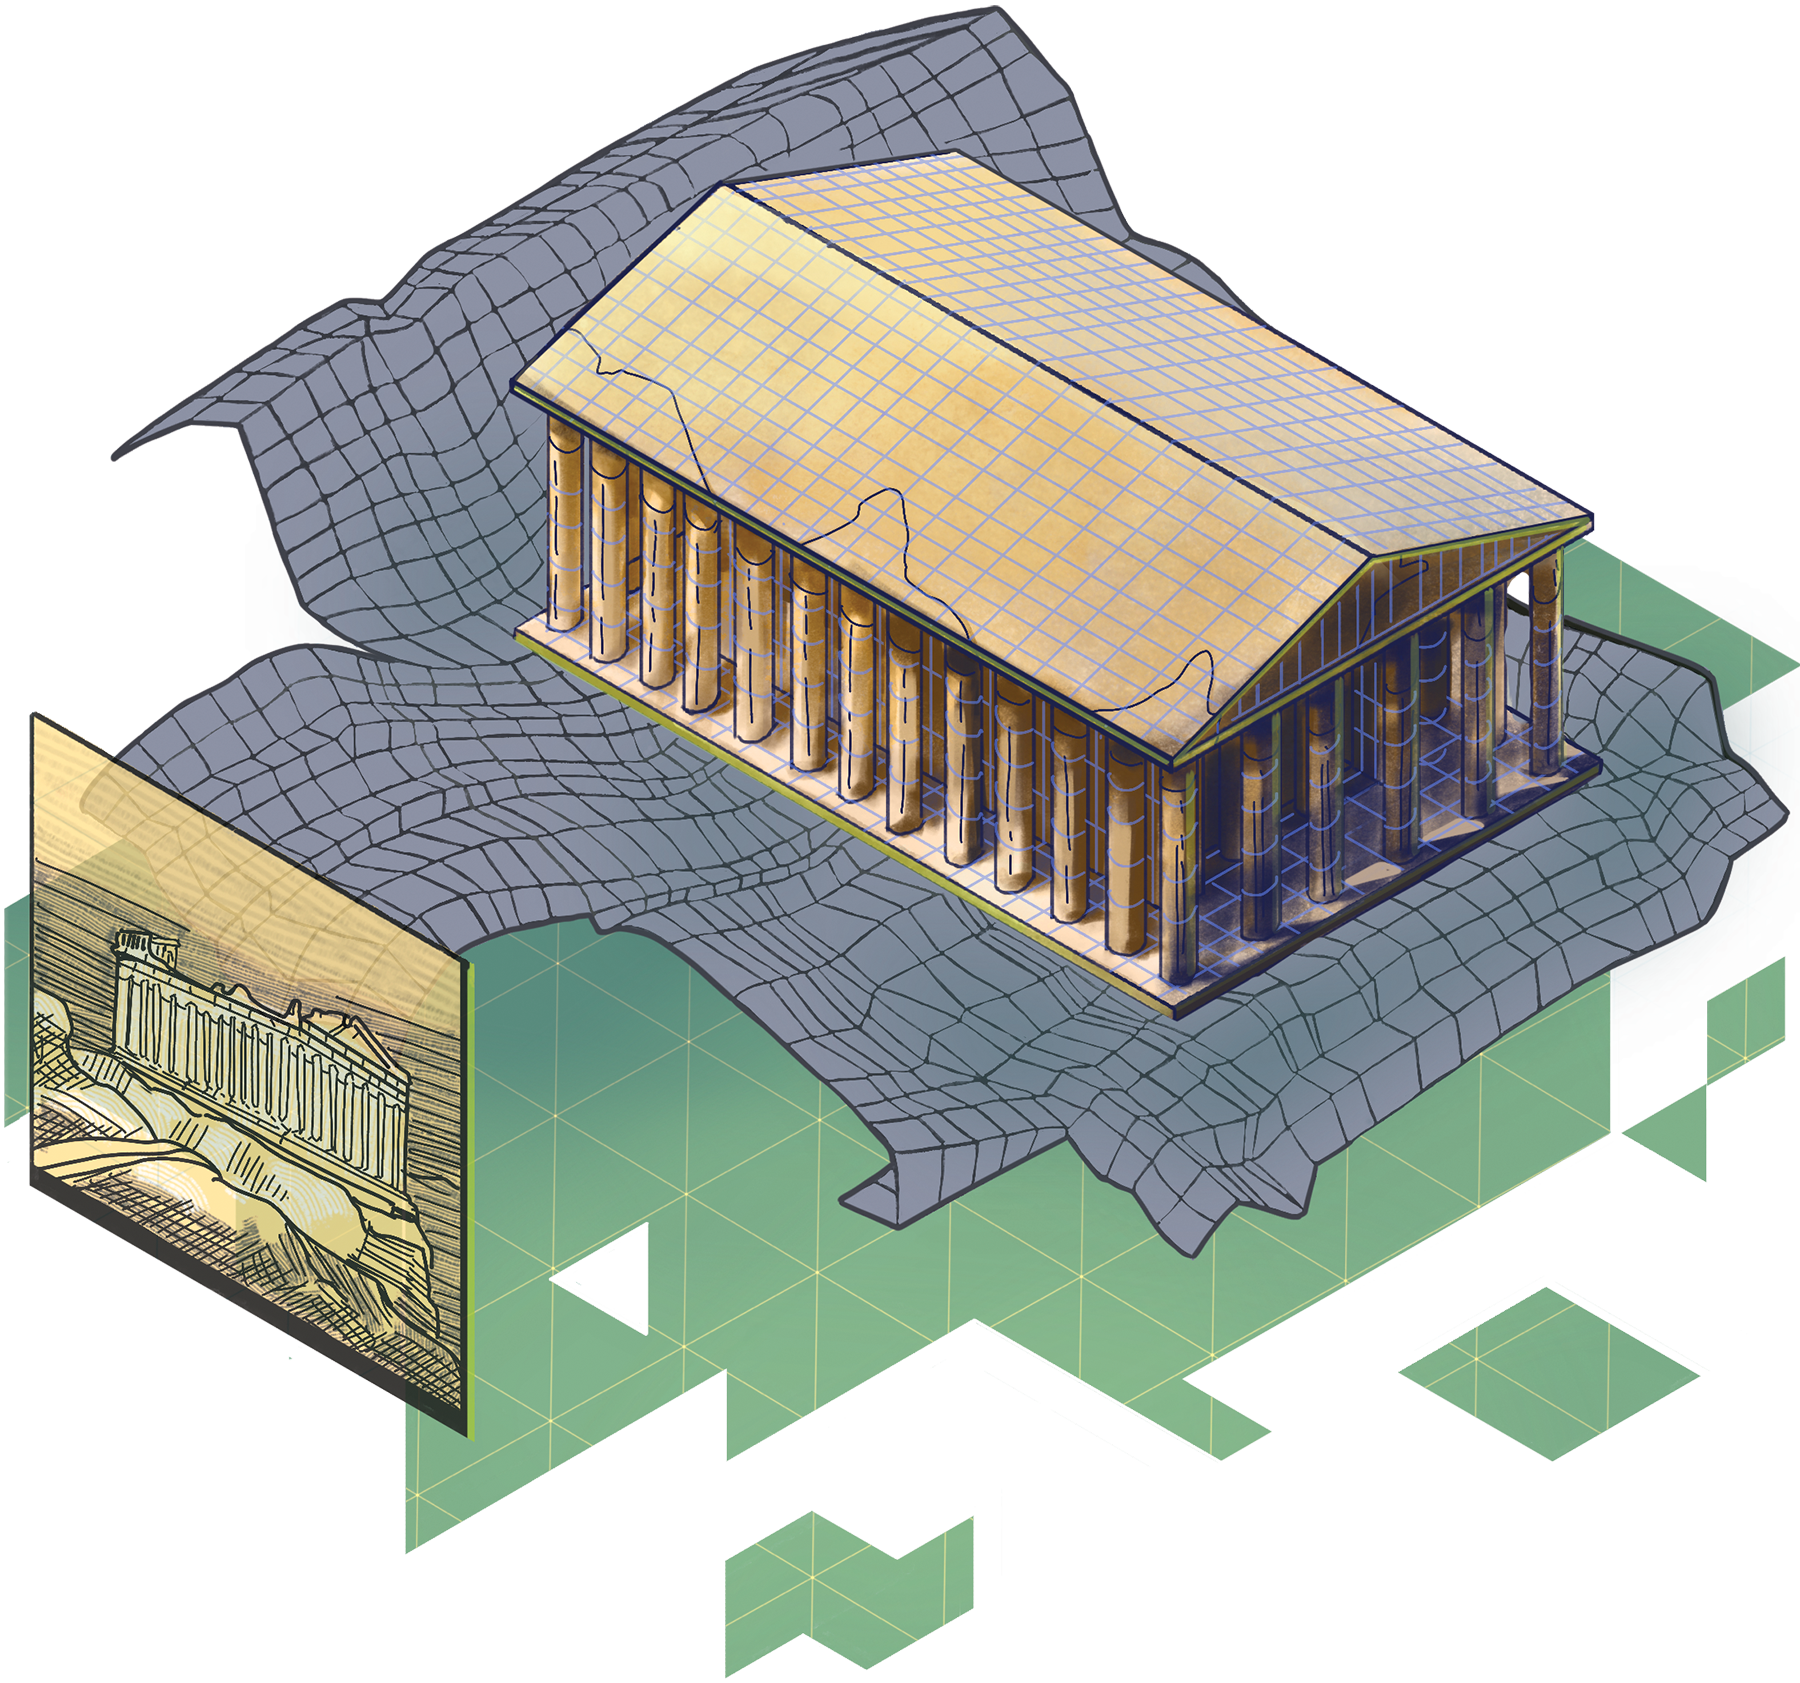 A colorful illustration of a 3D reconstruction model of the Parthenon in restored condition. In front of the model is a photo of the Parthenon as it exists today. The model is meant to represent AI reconstructing the building based on a the photo.